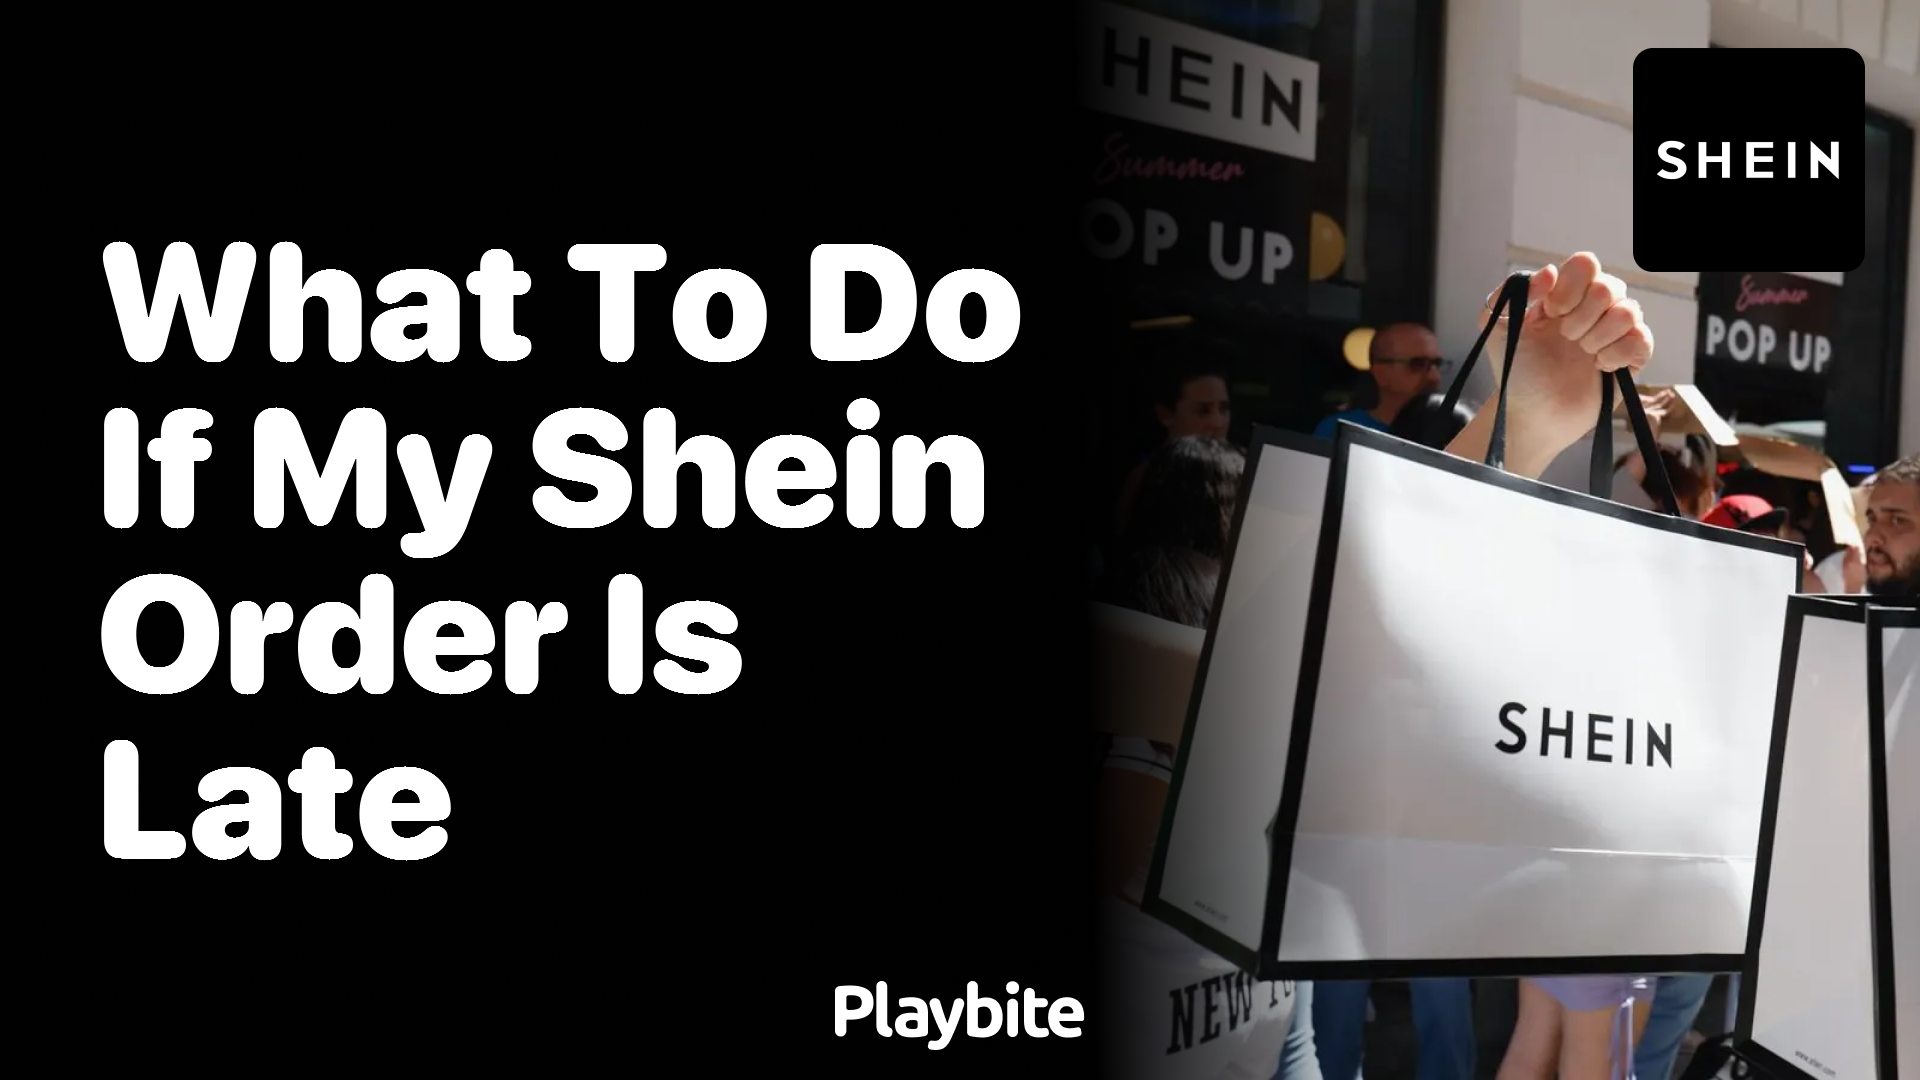 What to Do If Your SHEIN Order Is Late?